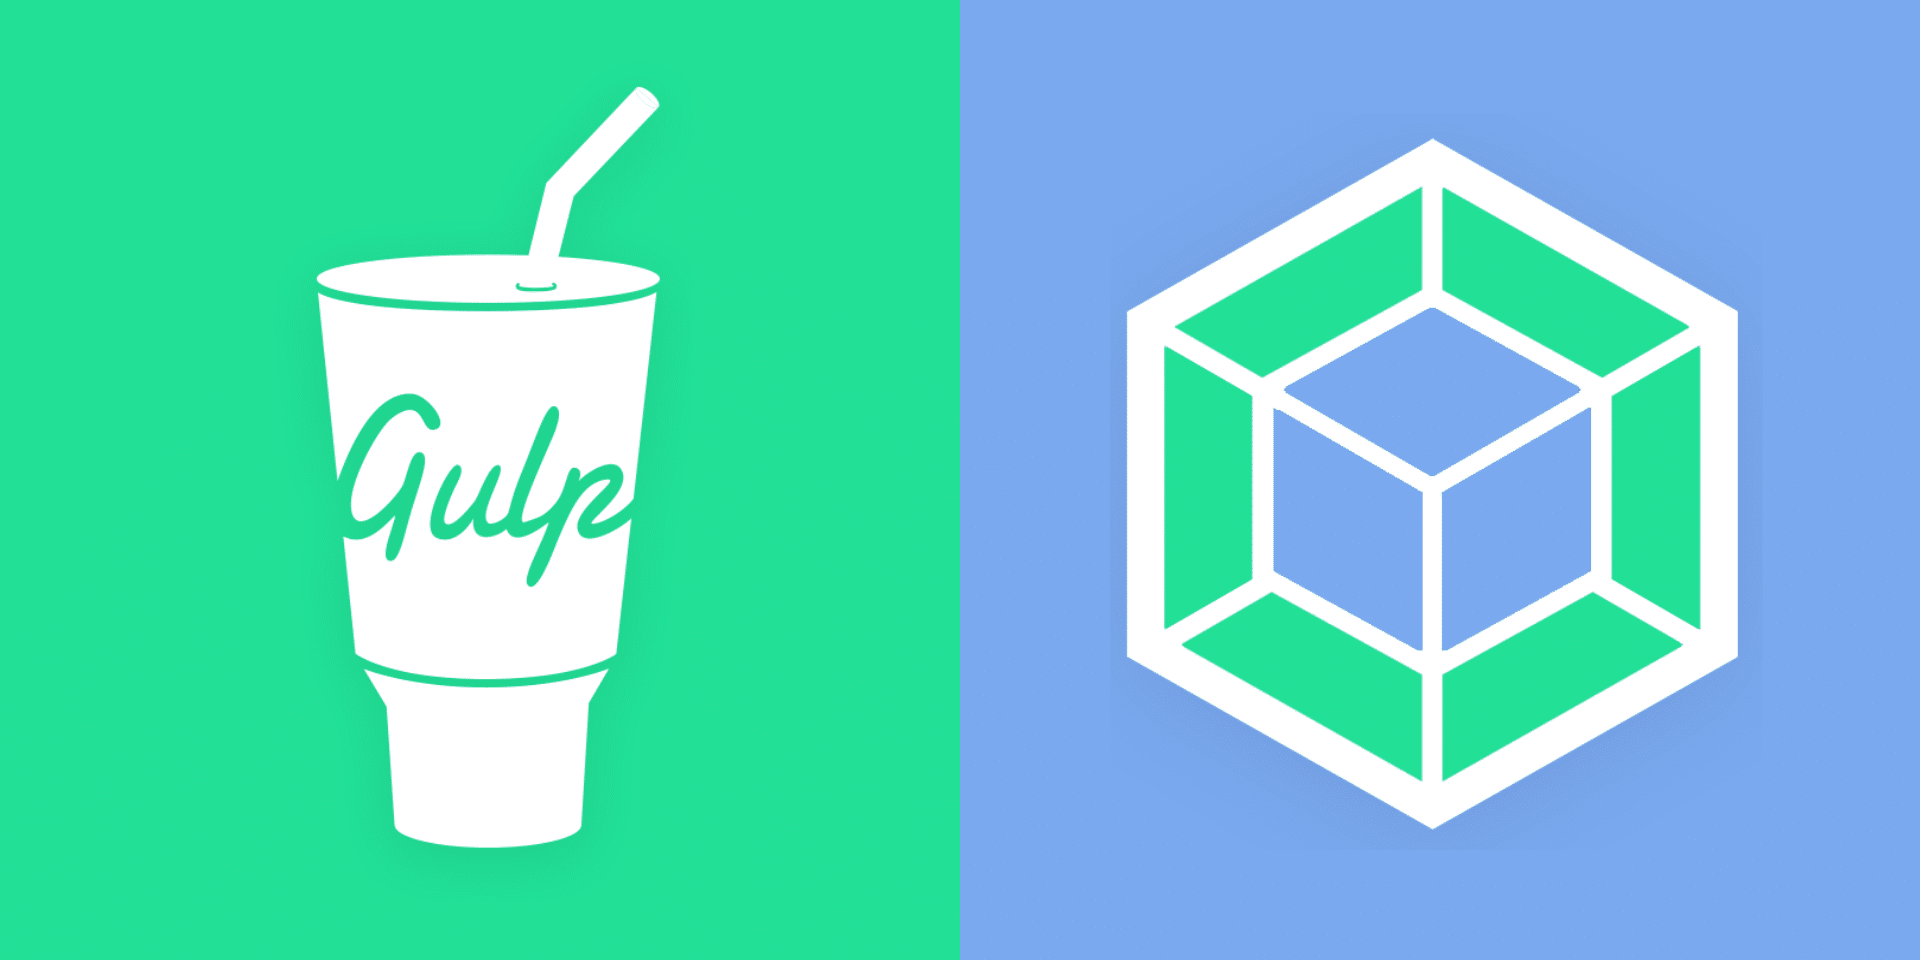 gulp and webpack logos side by side